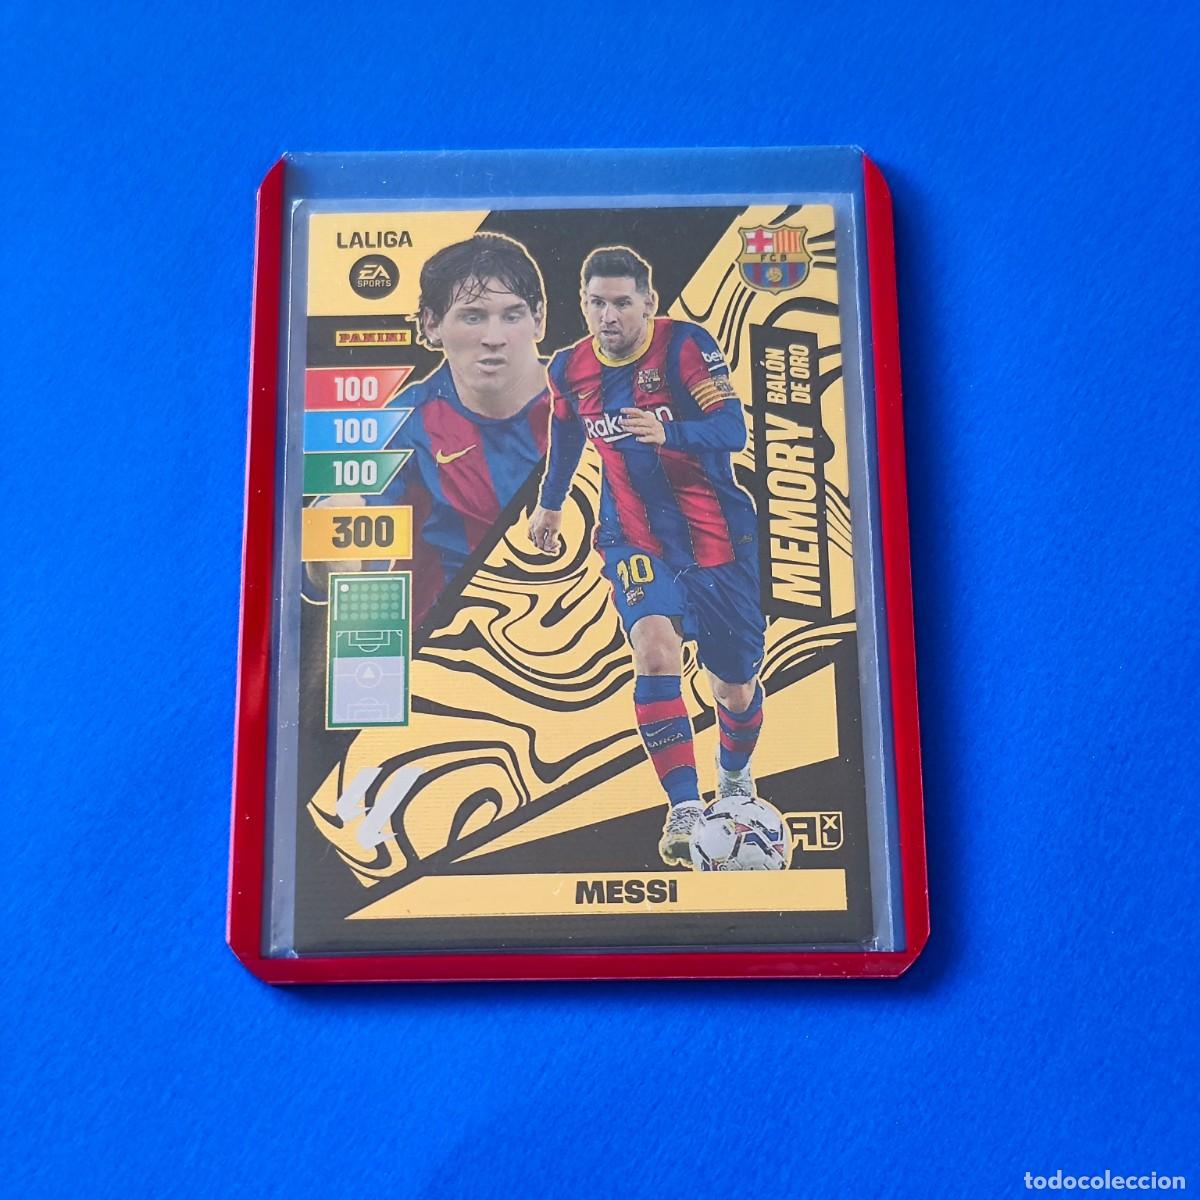 adrenalyn 2023 2024 / 23 24 barcelona messi mem - Buy Collectible football  stickers on todocoleccion